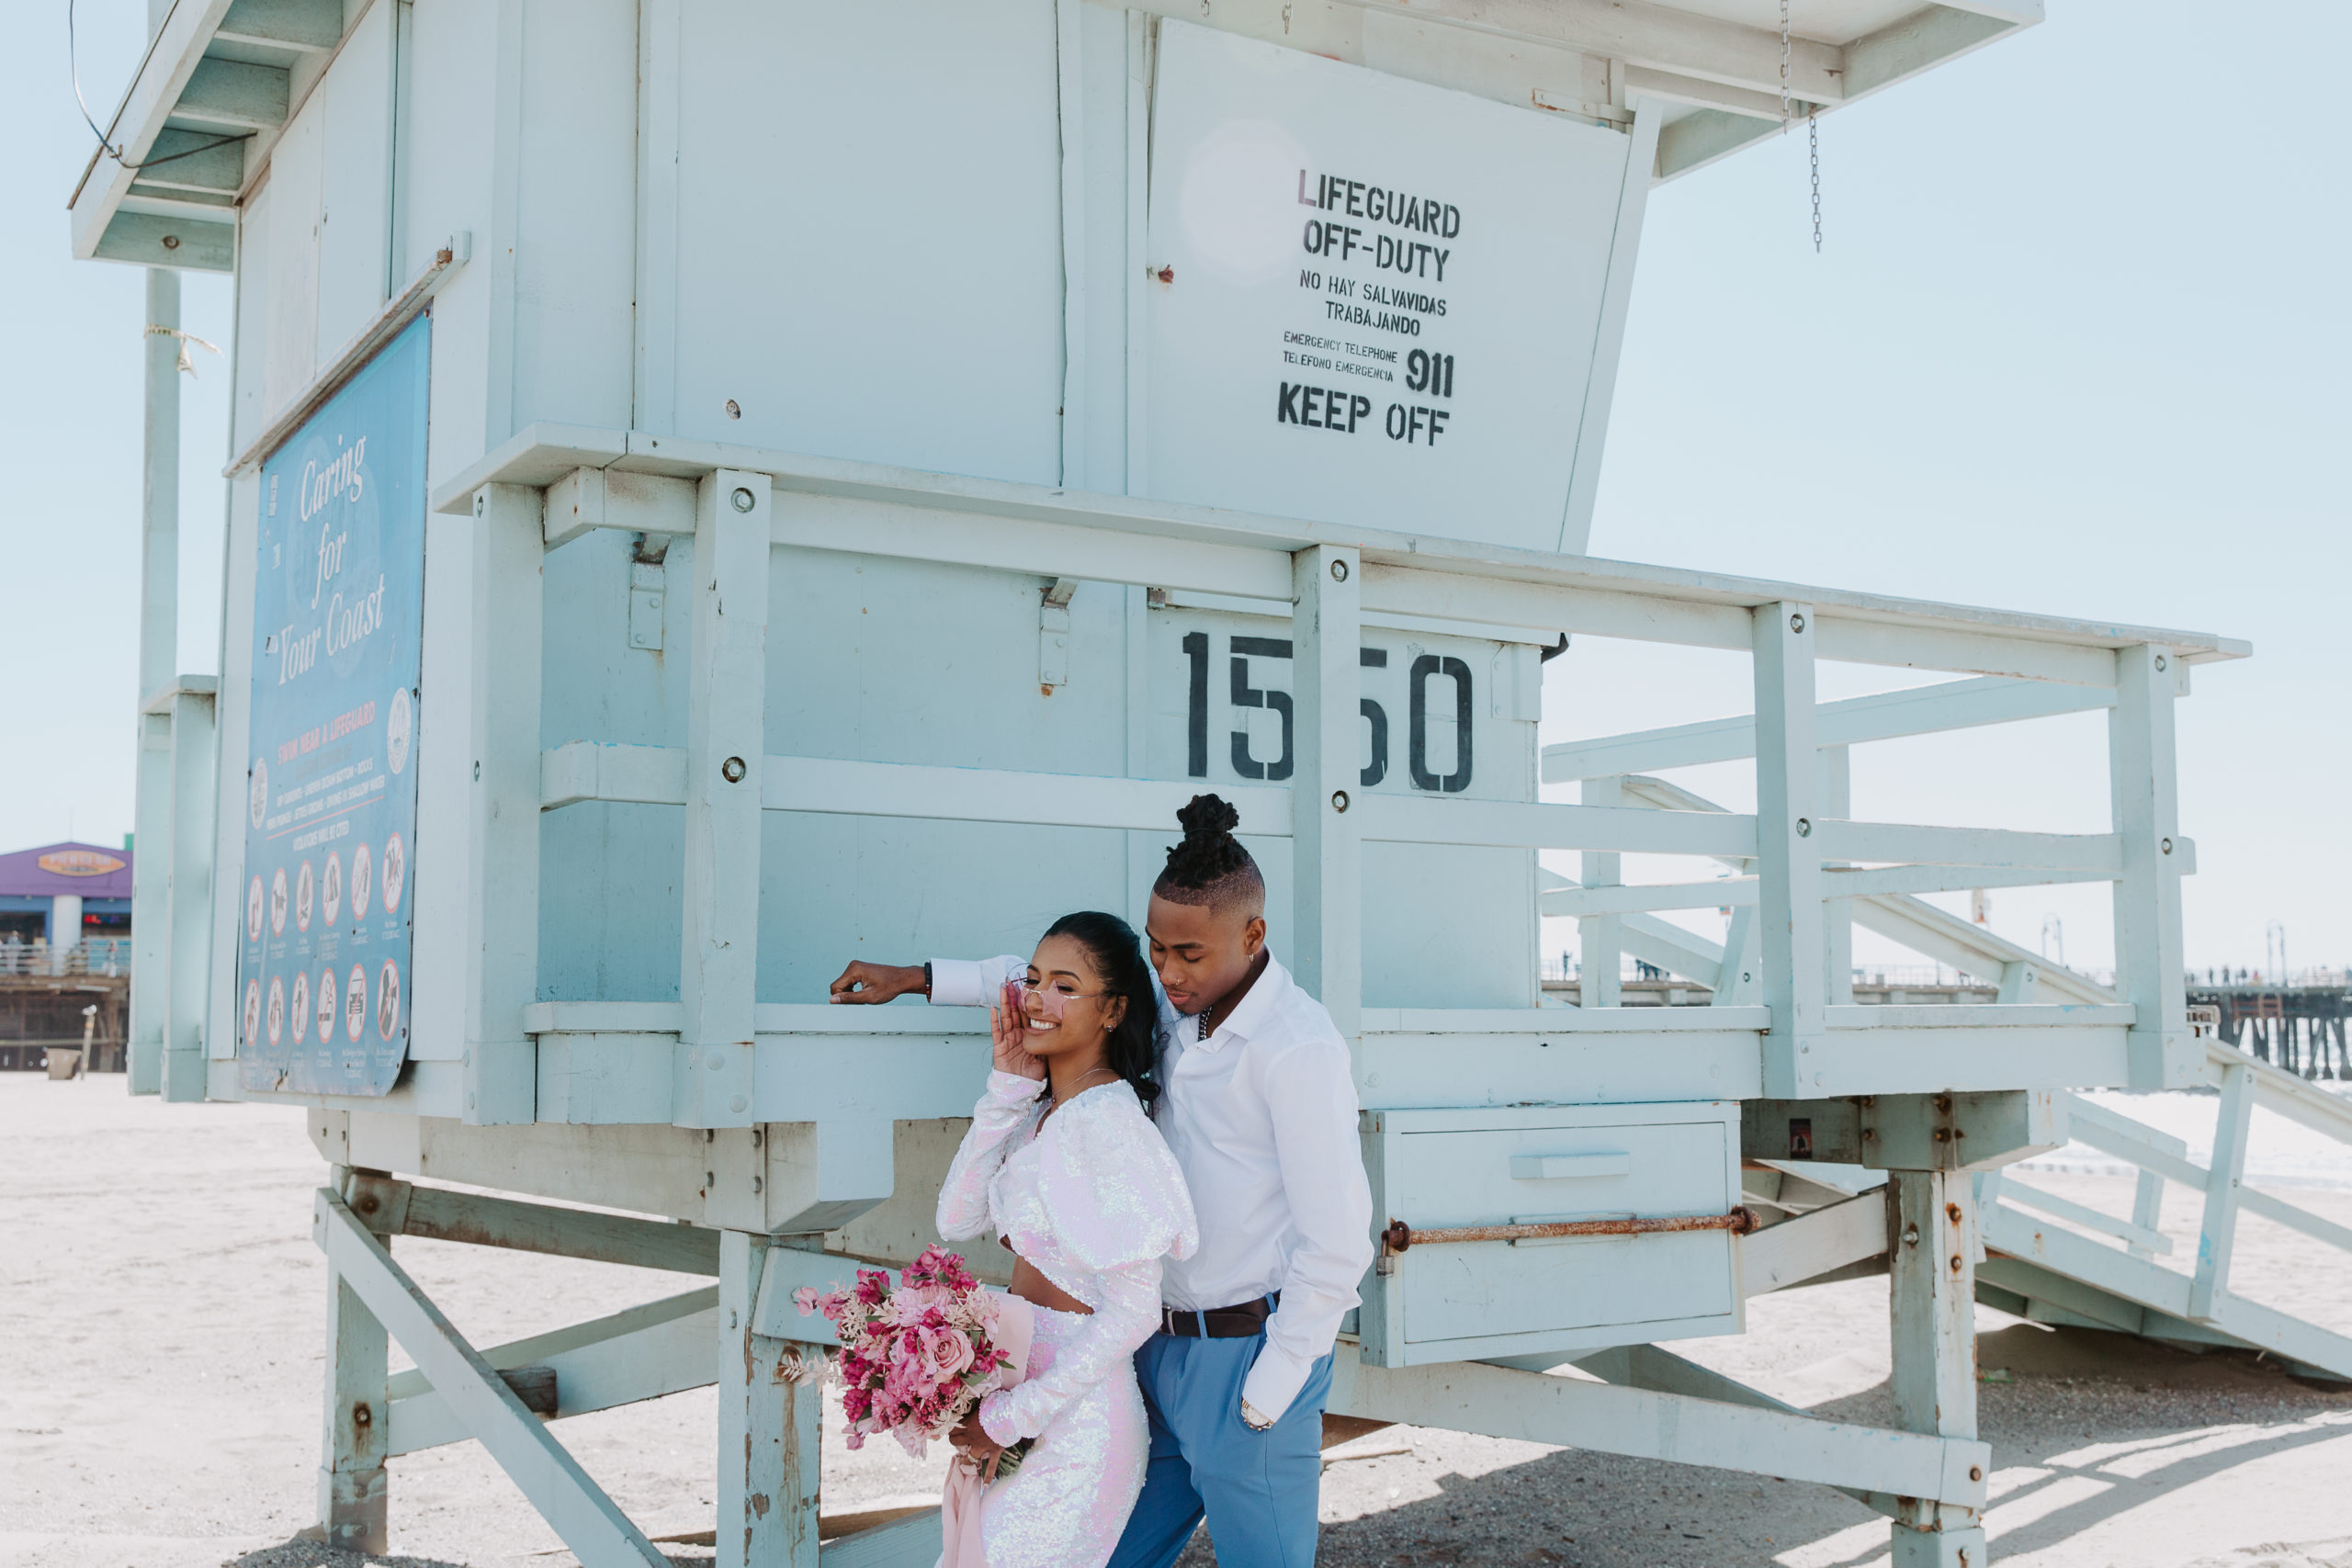 A newlywed couple leaning up against a lifeguard stand the bride is in a pink two piece dress holding a bouquet of pink flowers and the man standing behind her is in bright blue dress pants and a white shirt during their Santa Monica pier wedding in California